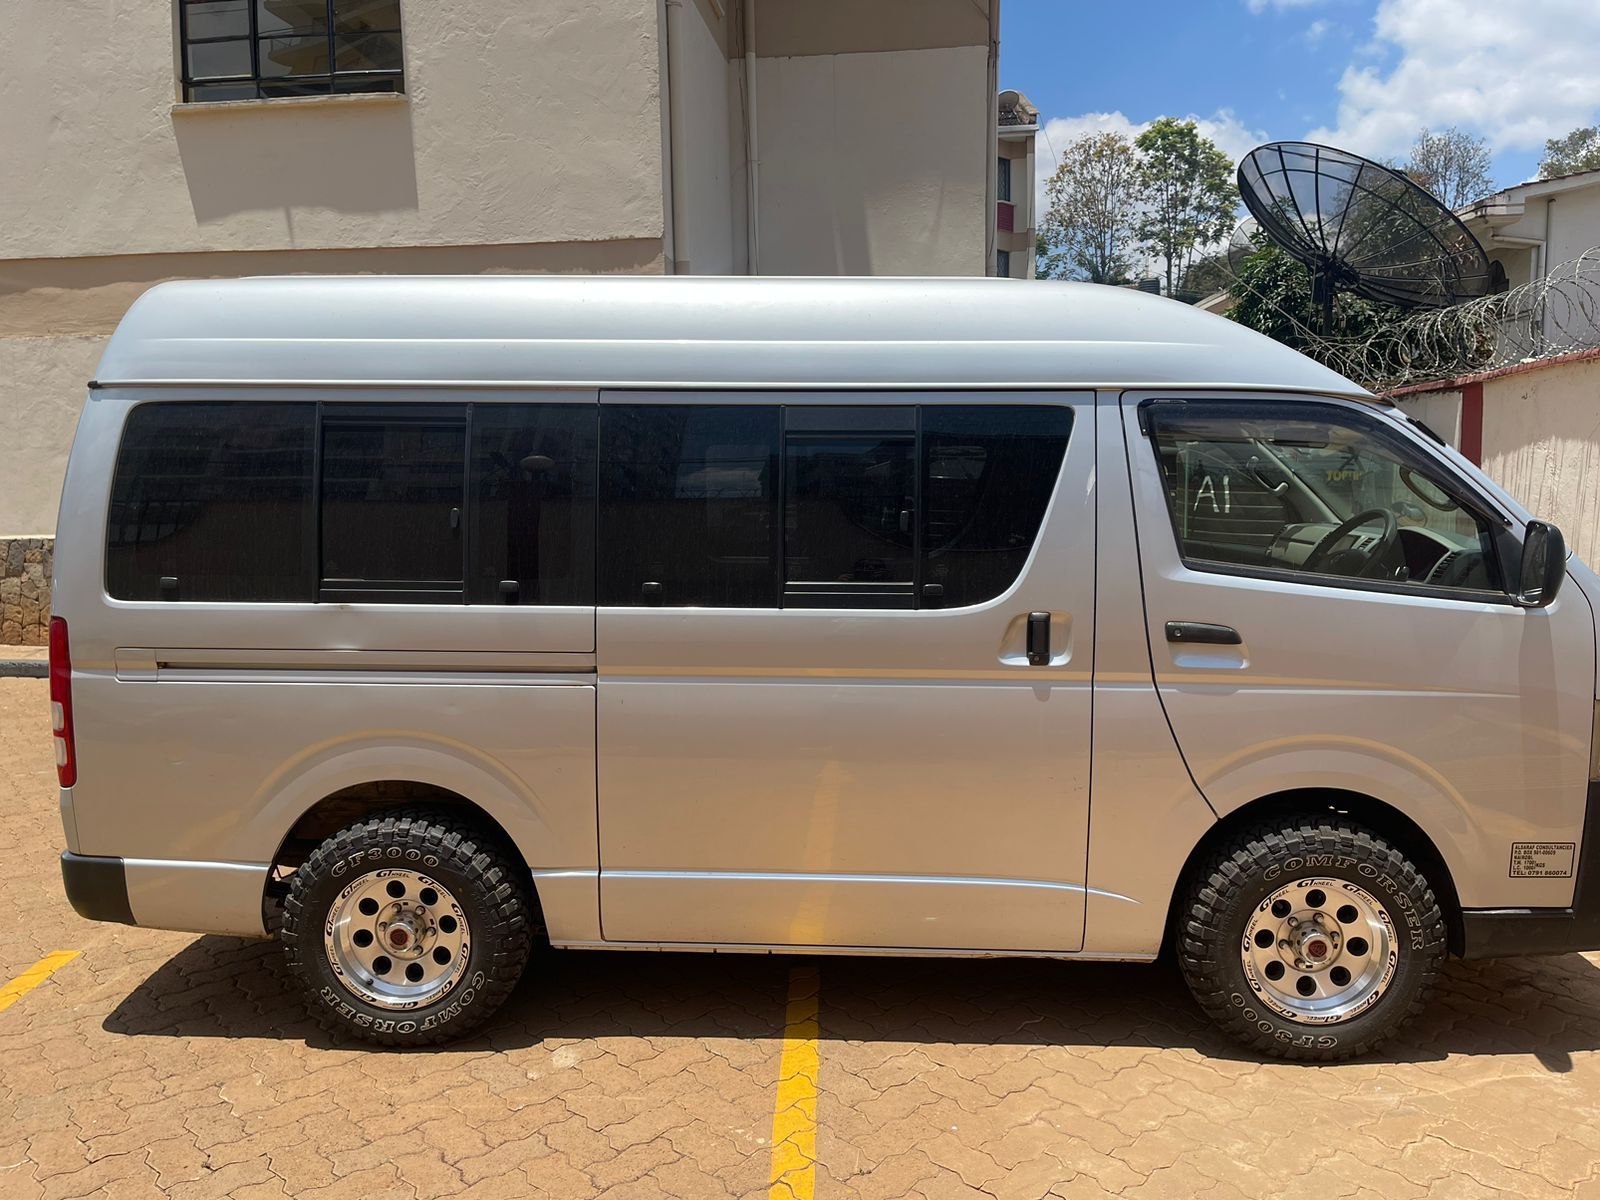 Toyota HIACE 7L 2013 14 SEATER Private You Pay 40% DEPOSIT TRADE IN OK